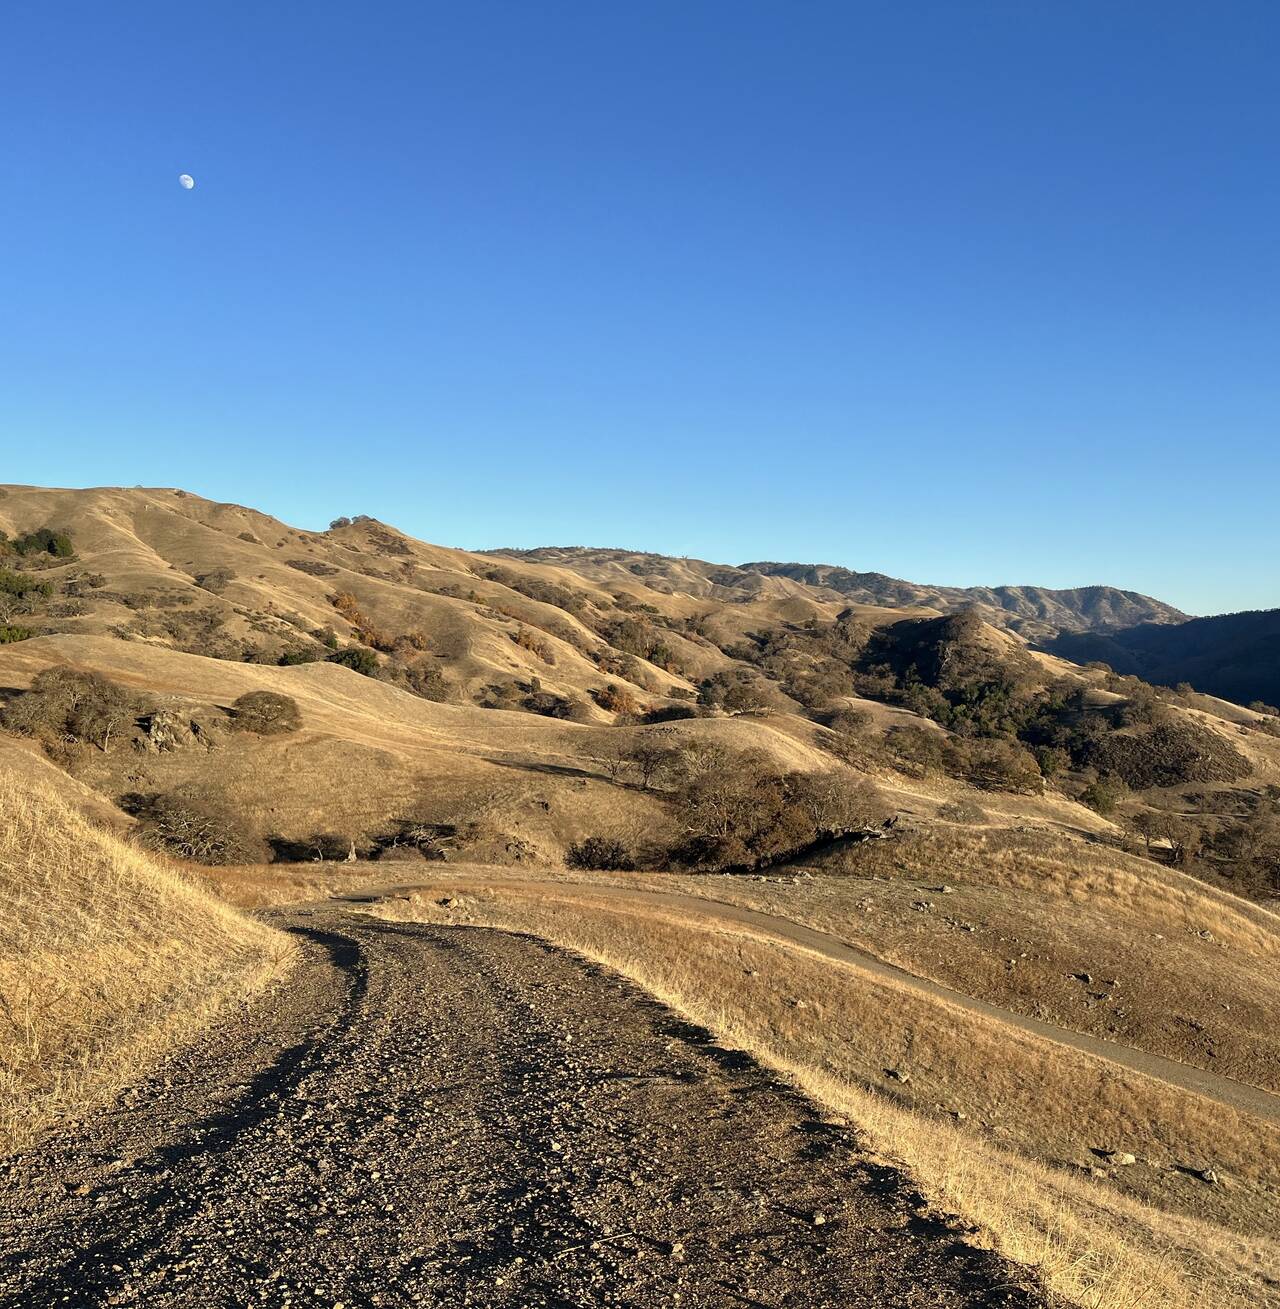 Looking eastward, the moon rises above warm-colored hills